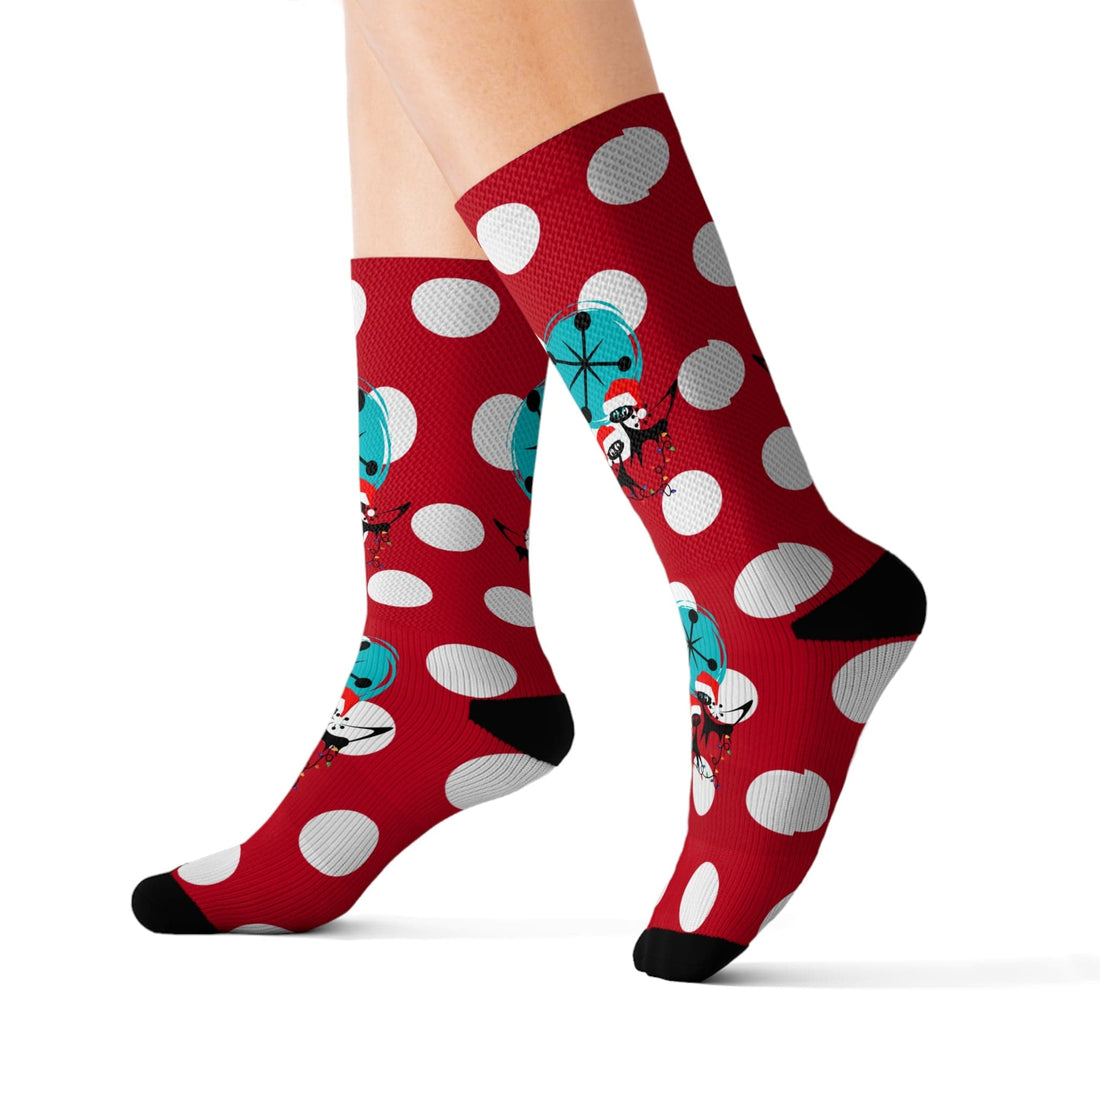 Christmas Socks, Red White, Polka Dot and Kitschy Crazy Atomic Cats  Socks All Over Prints S